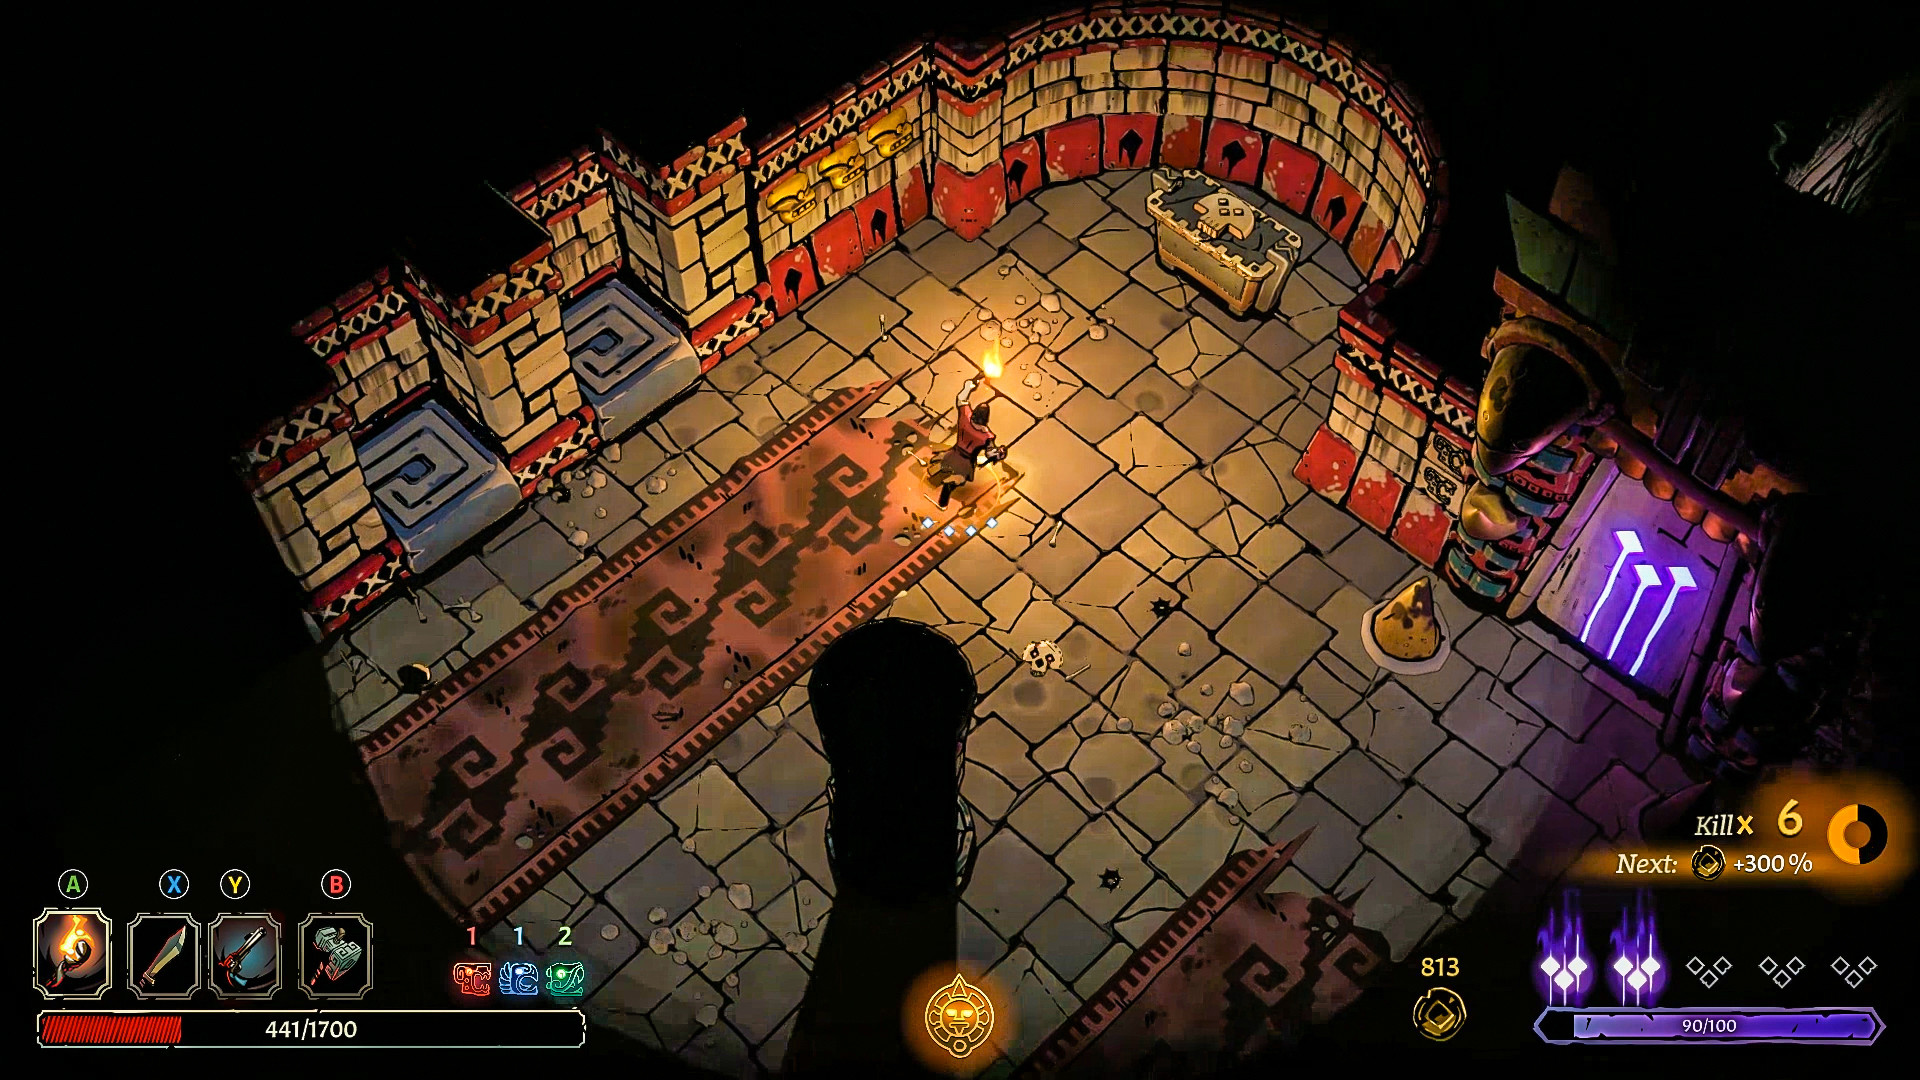 Curse of the Dead Gods Free Download